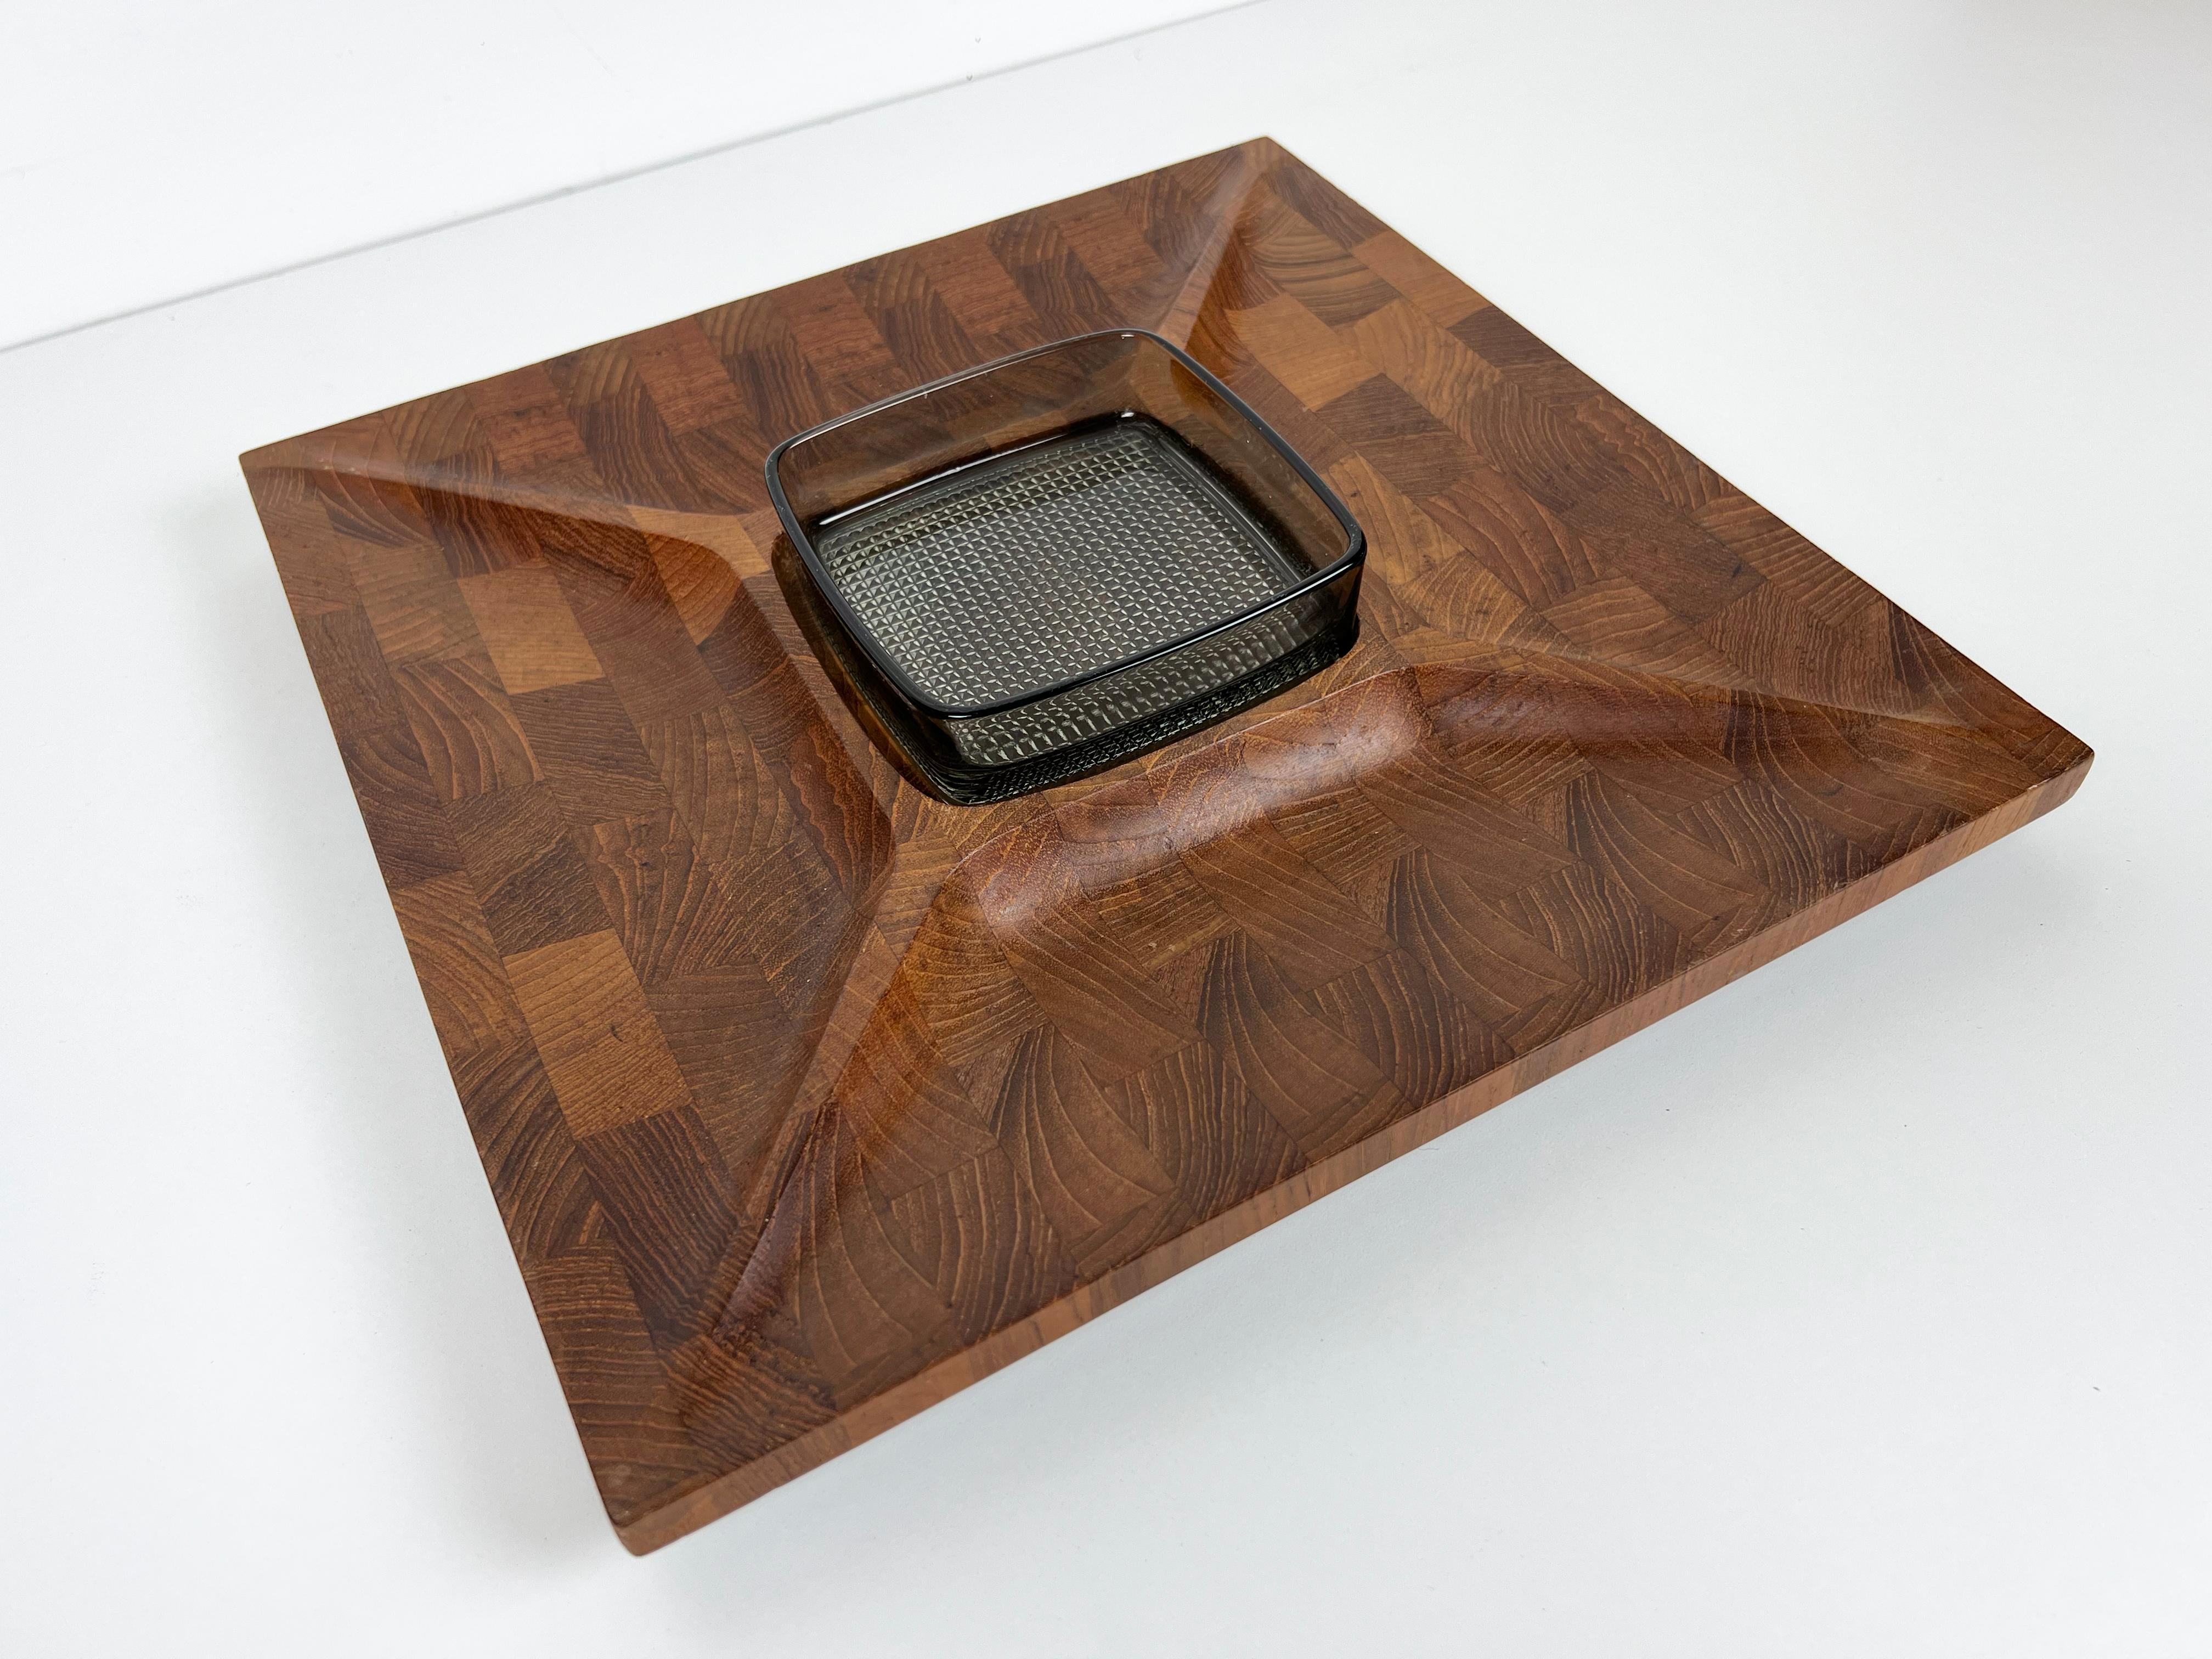 Vintage Danish divided serving tray in endgrain teak with smoked glass dish by Digsmed.

Maker: Digsmed

Origin: Denmark

Year: 1964

Style: Mid-Century Modern / Danish Modern / Scandinavian

Dimensions: 12.25